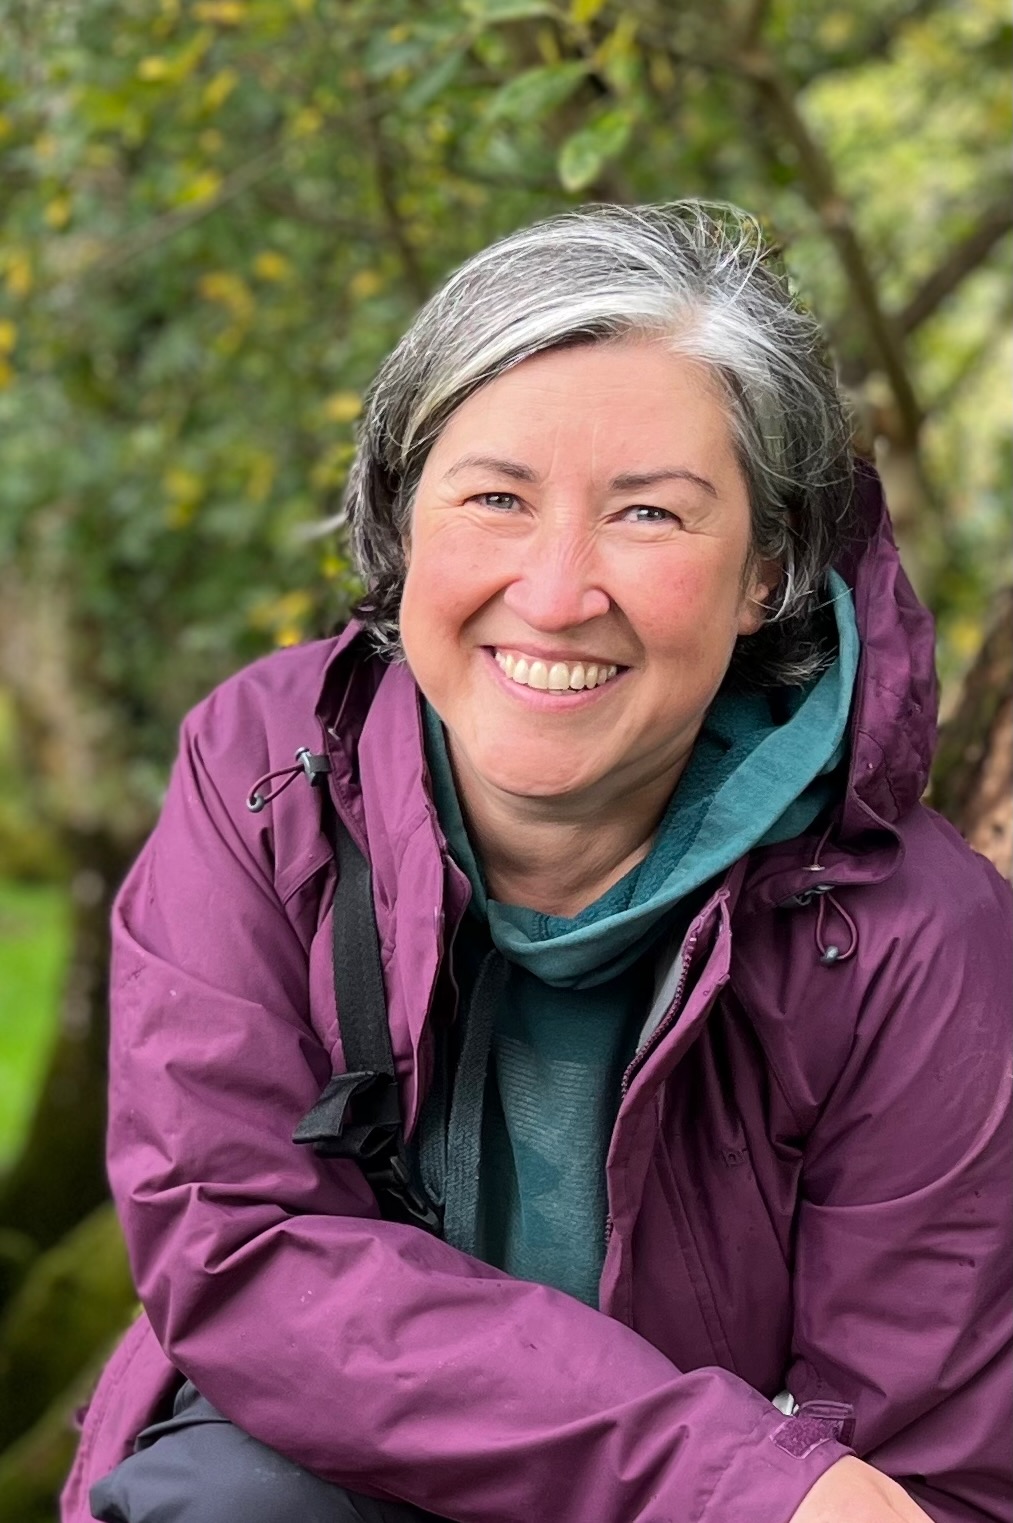 Louise smiling at camera in front of trees. She has greying dark hair and is wearing a purple raincoat